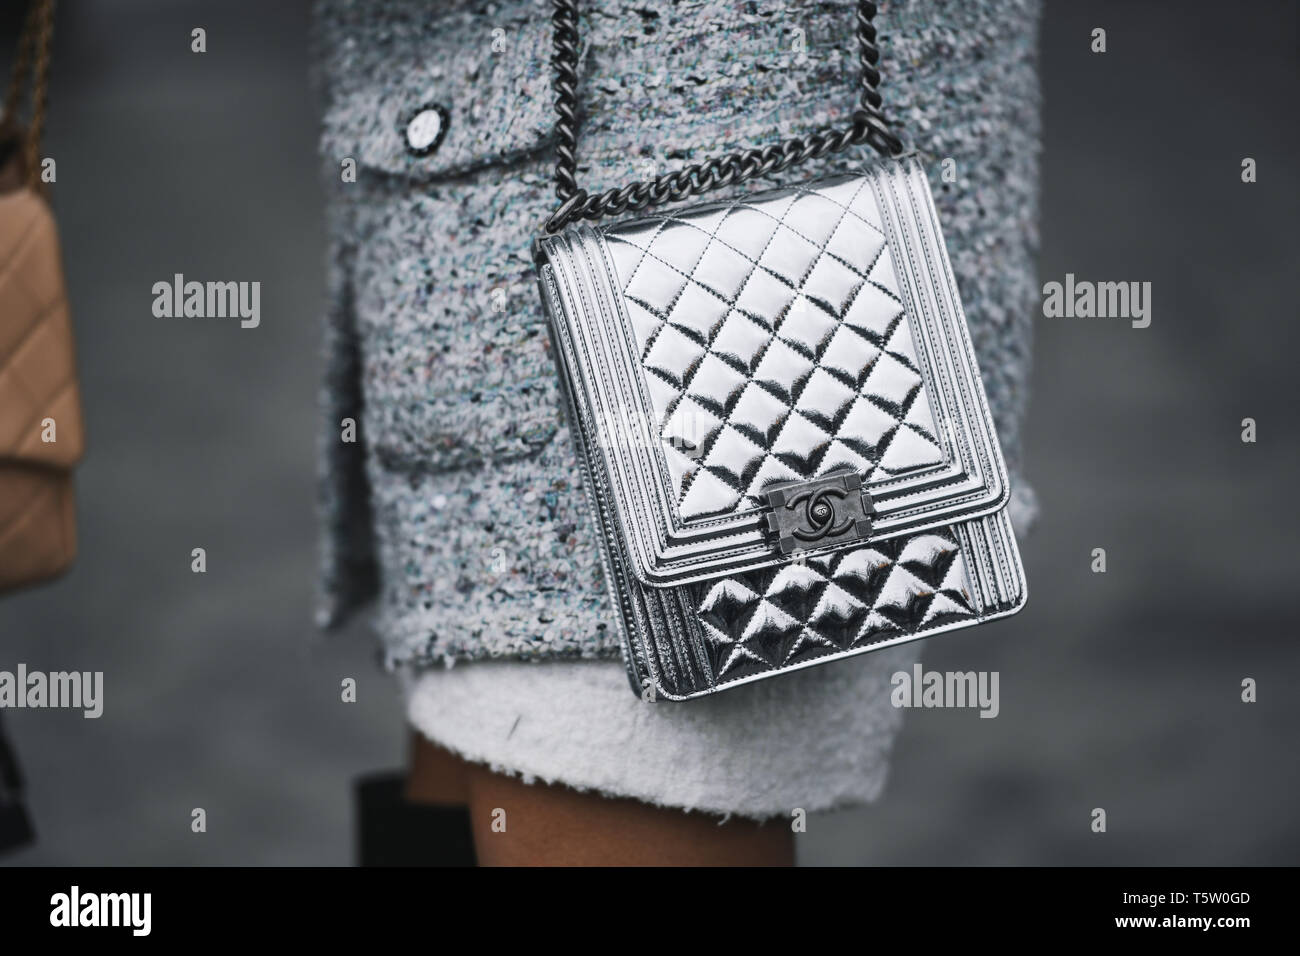 Paris, France - March 05, 2019: Street style outfit - Woman wearing Chanel  purse after a fashion show during Paris Fashion Week - PFWFW19 Stock Photo  - Alamy